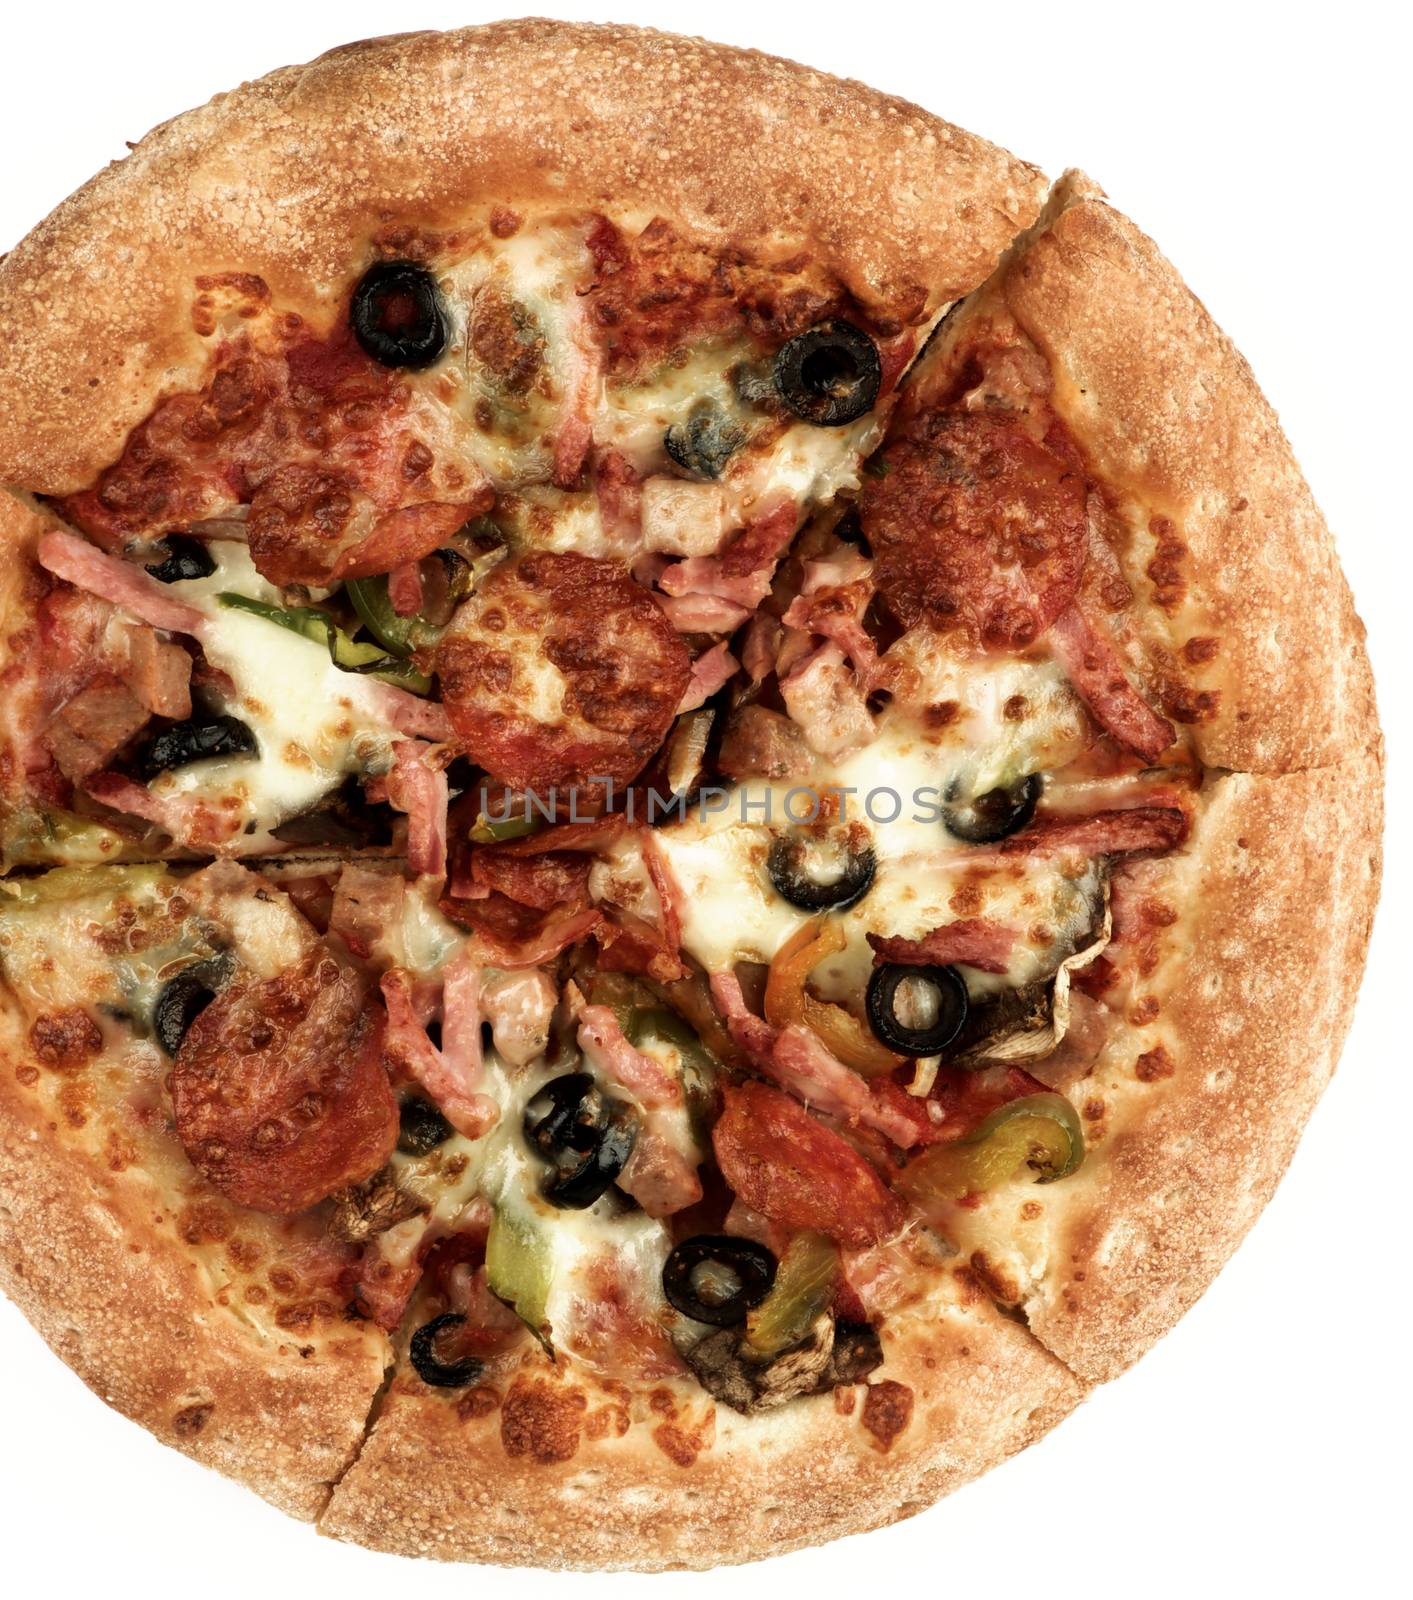 Freshly Baked Pepperoni Pizza with Black Olives, Pepperoni, Ham and Cheese Cross Section on White background